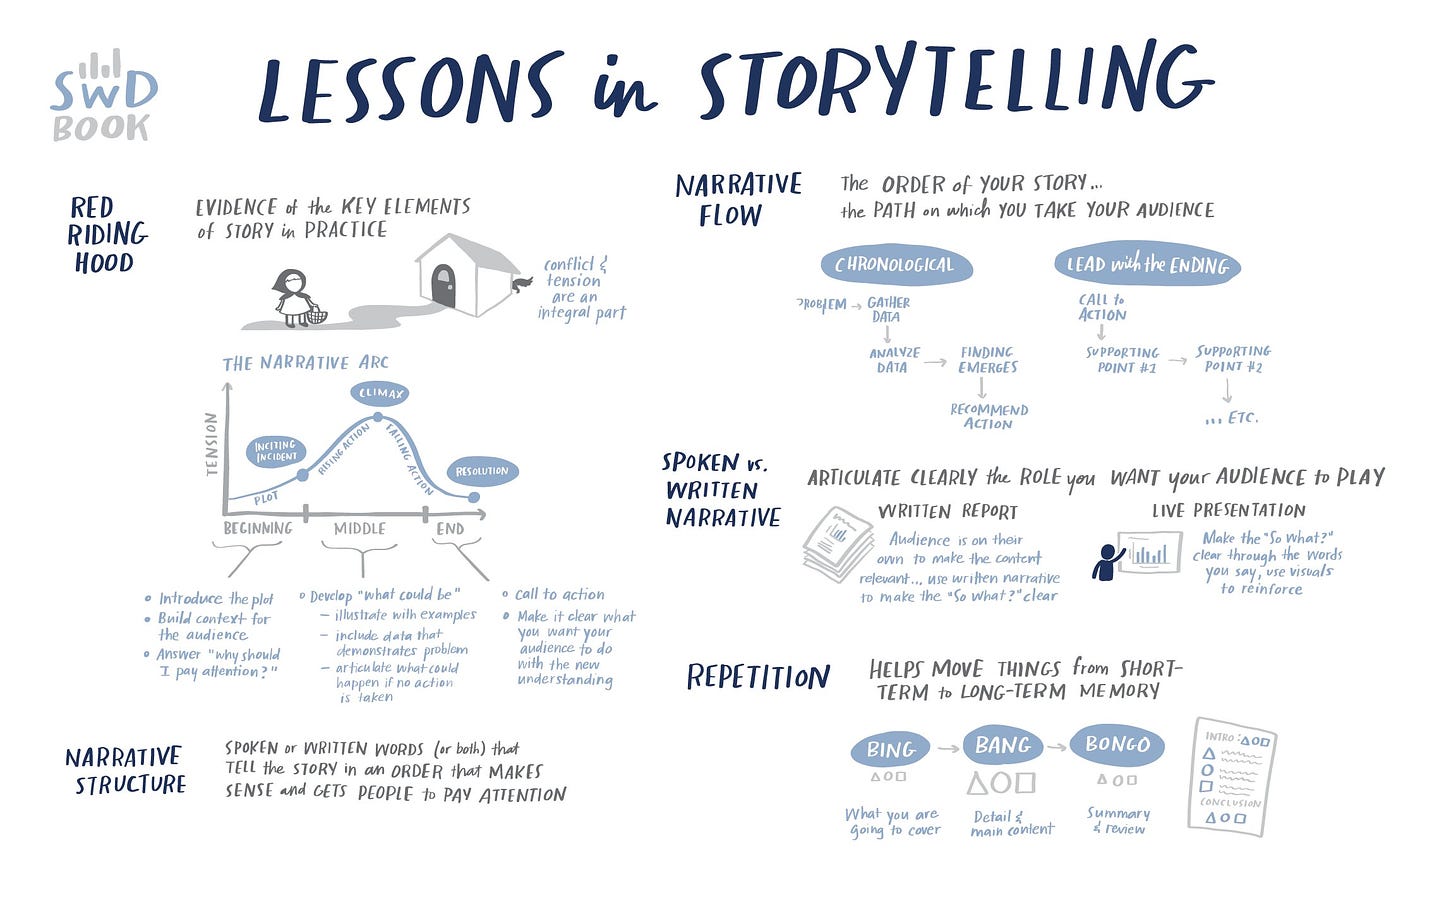 Cole Knaflic's "Lessons in Storytelling". Talks about how Red Riding Hood shows an effective story arc of inciting incident, climax, and resolution. Explains that the narrative structure (whether spoken or written) will help you tell a story in an order that makes sense and gets peoples' attention. Iterates that repetition helps move things from short to long term memory. For more details, see the book.